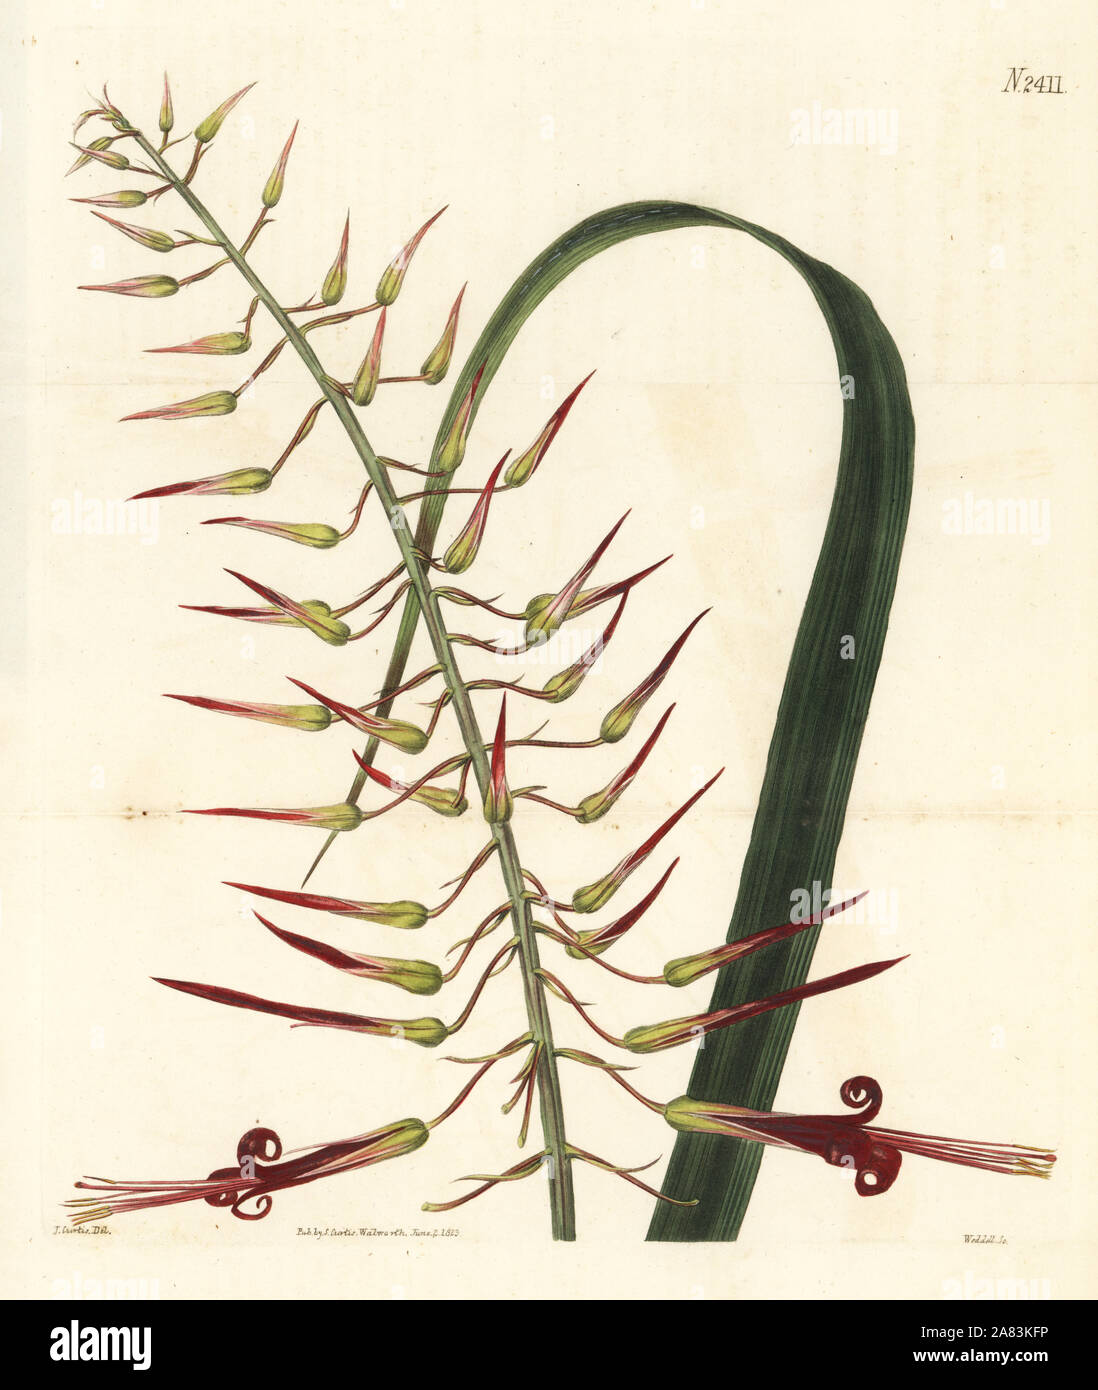 Long-stamened pitcairnia, Pitcairnia staminea. Handcoloured copperplate engraving by Weddell after a botanical illustration by John Curtis from William Curtis' Botanical Magazine, Samuel Curtis, London, 1823. Stock Photo